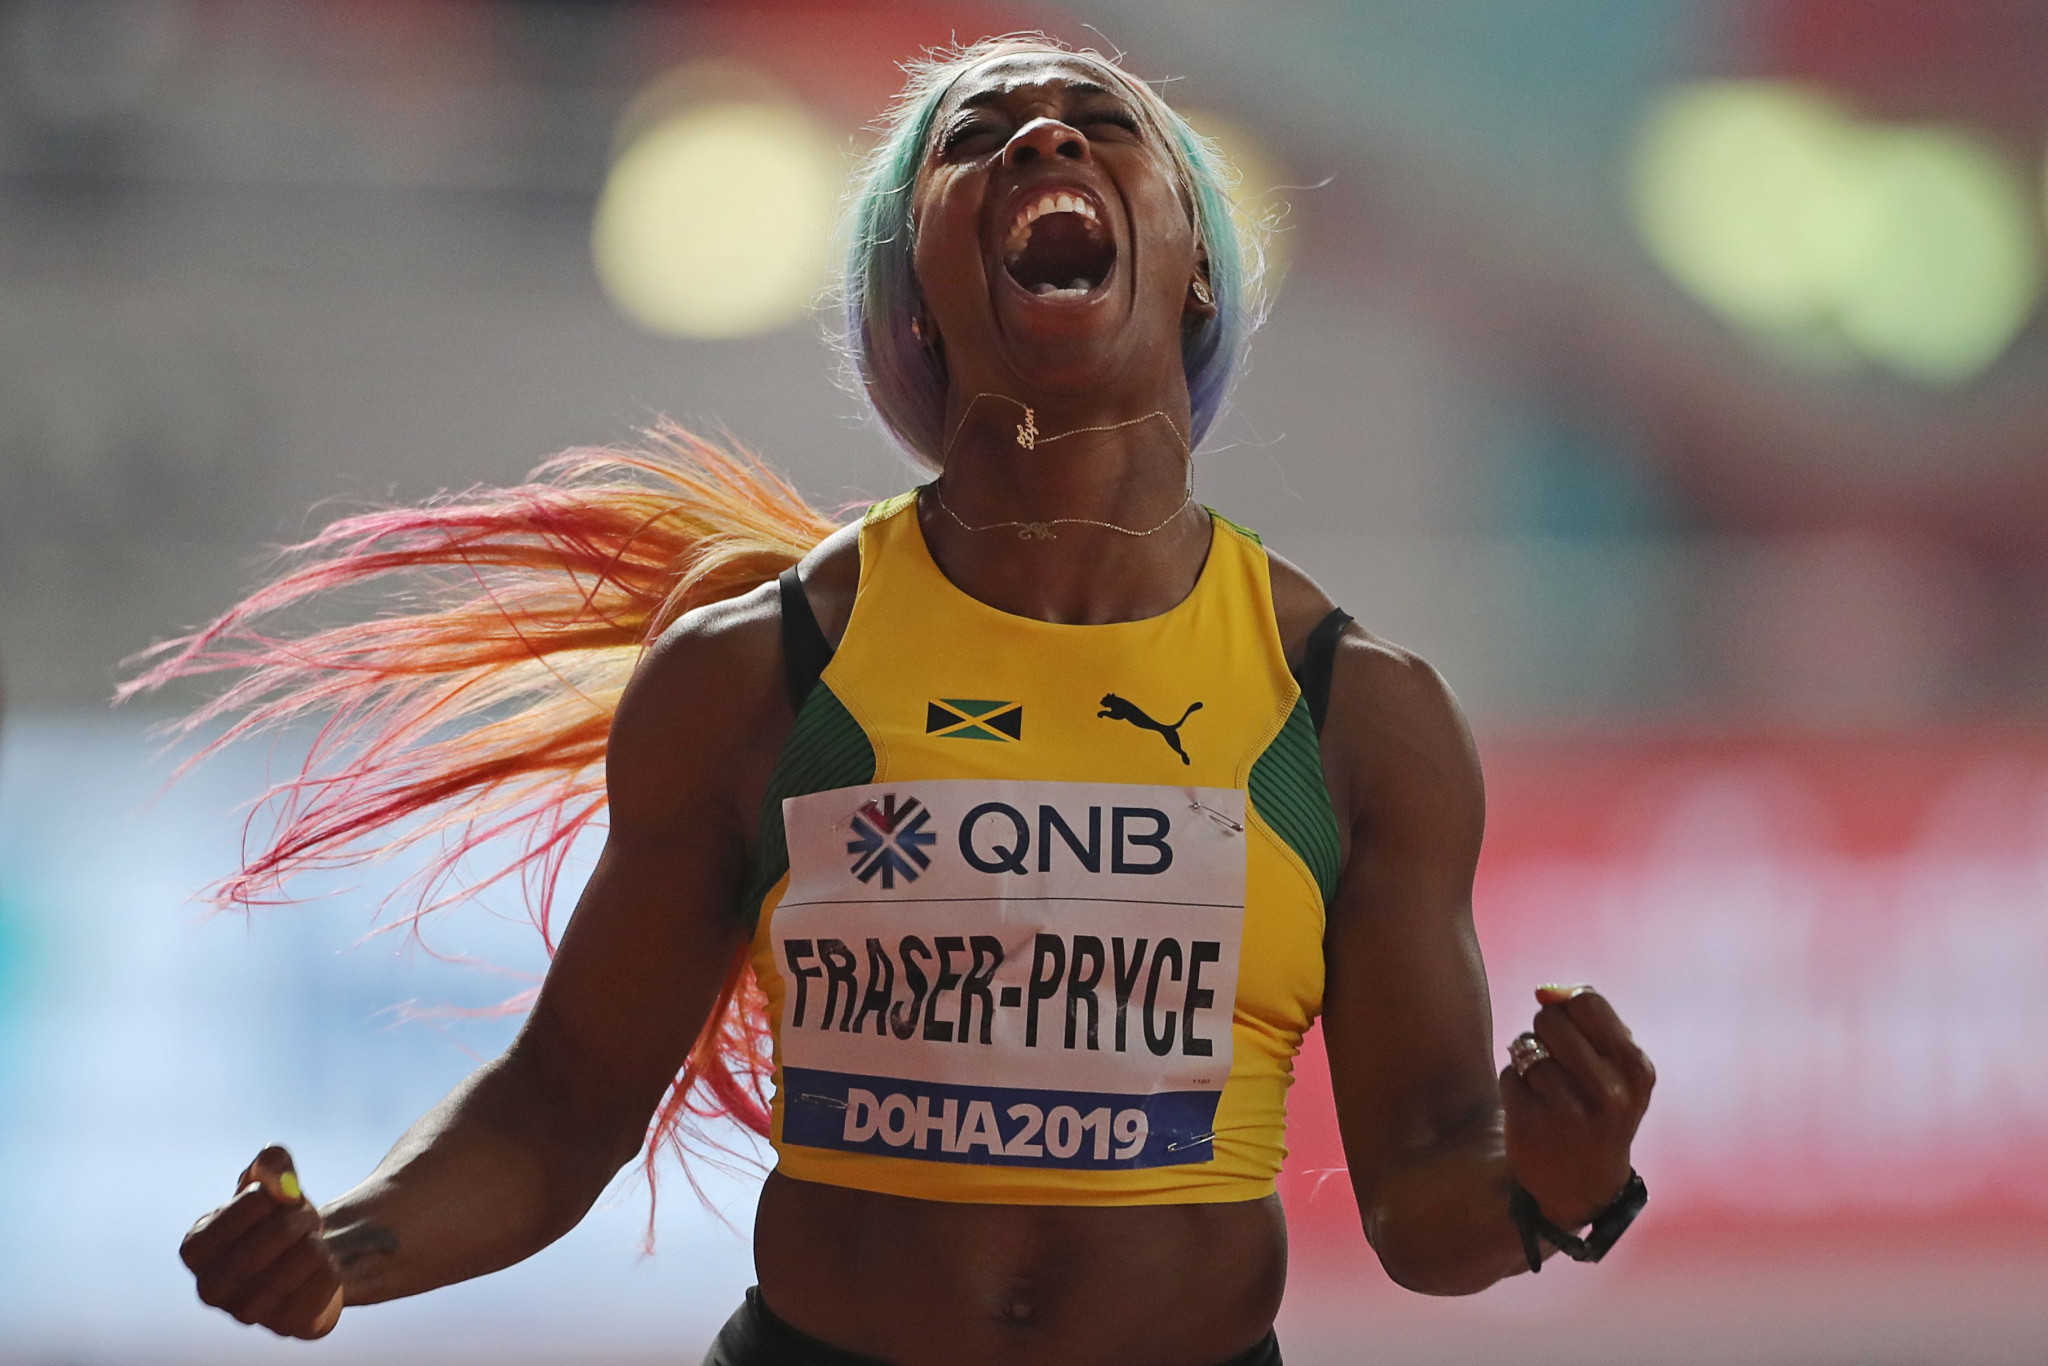  Fraser-Pryce regains women’s world 100m title in Doha as Sidorova and Taylor earn dramatic wins